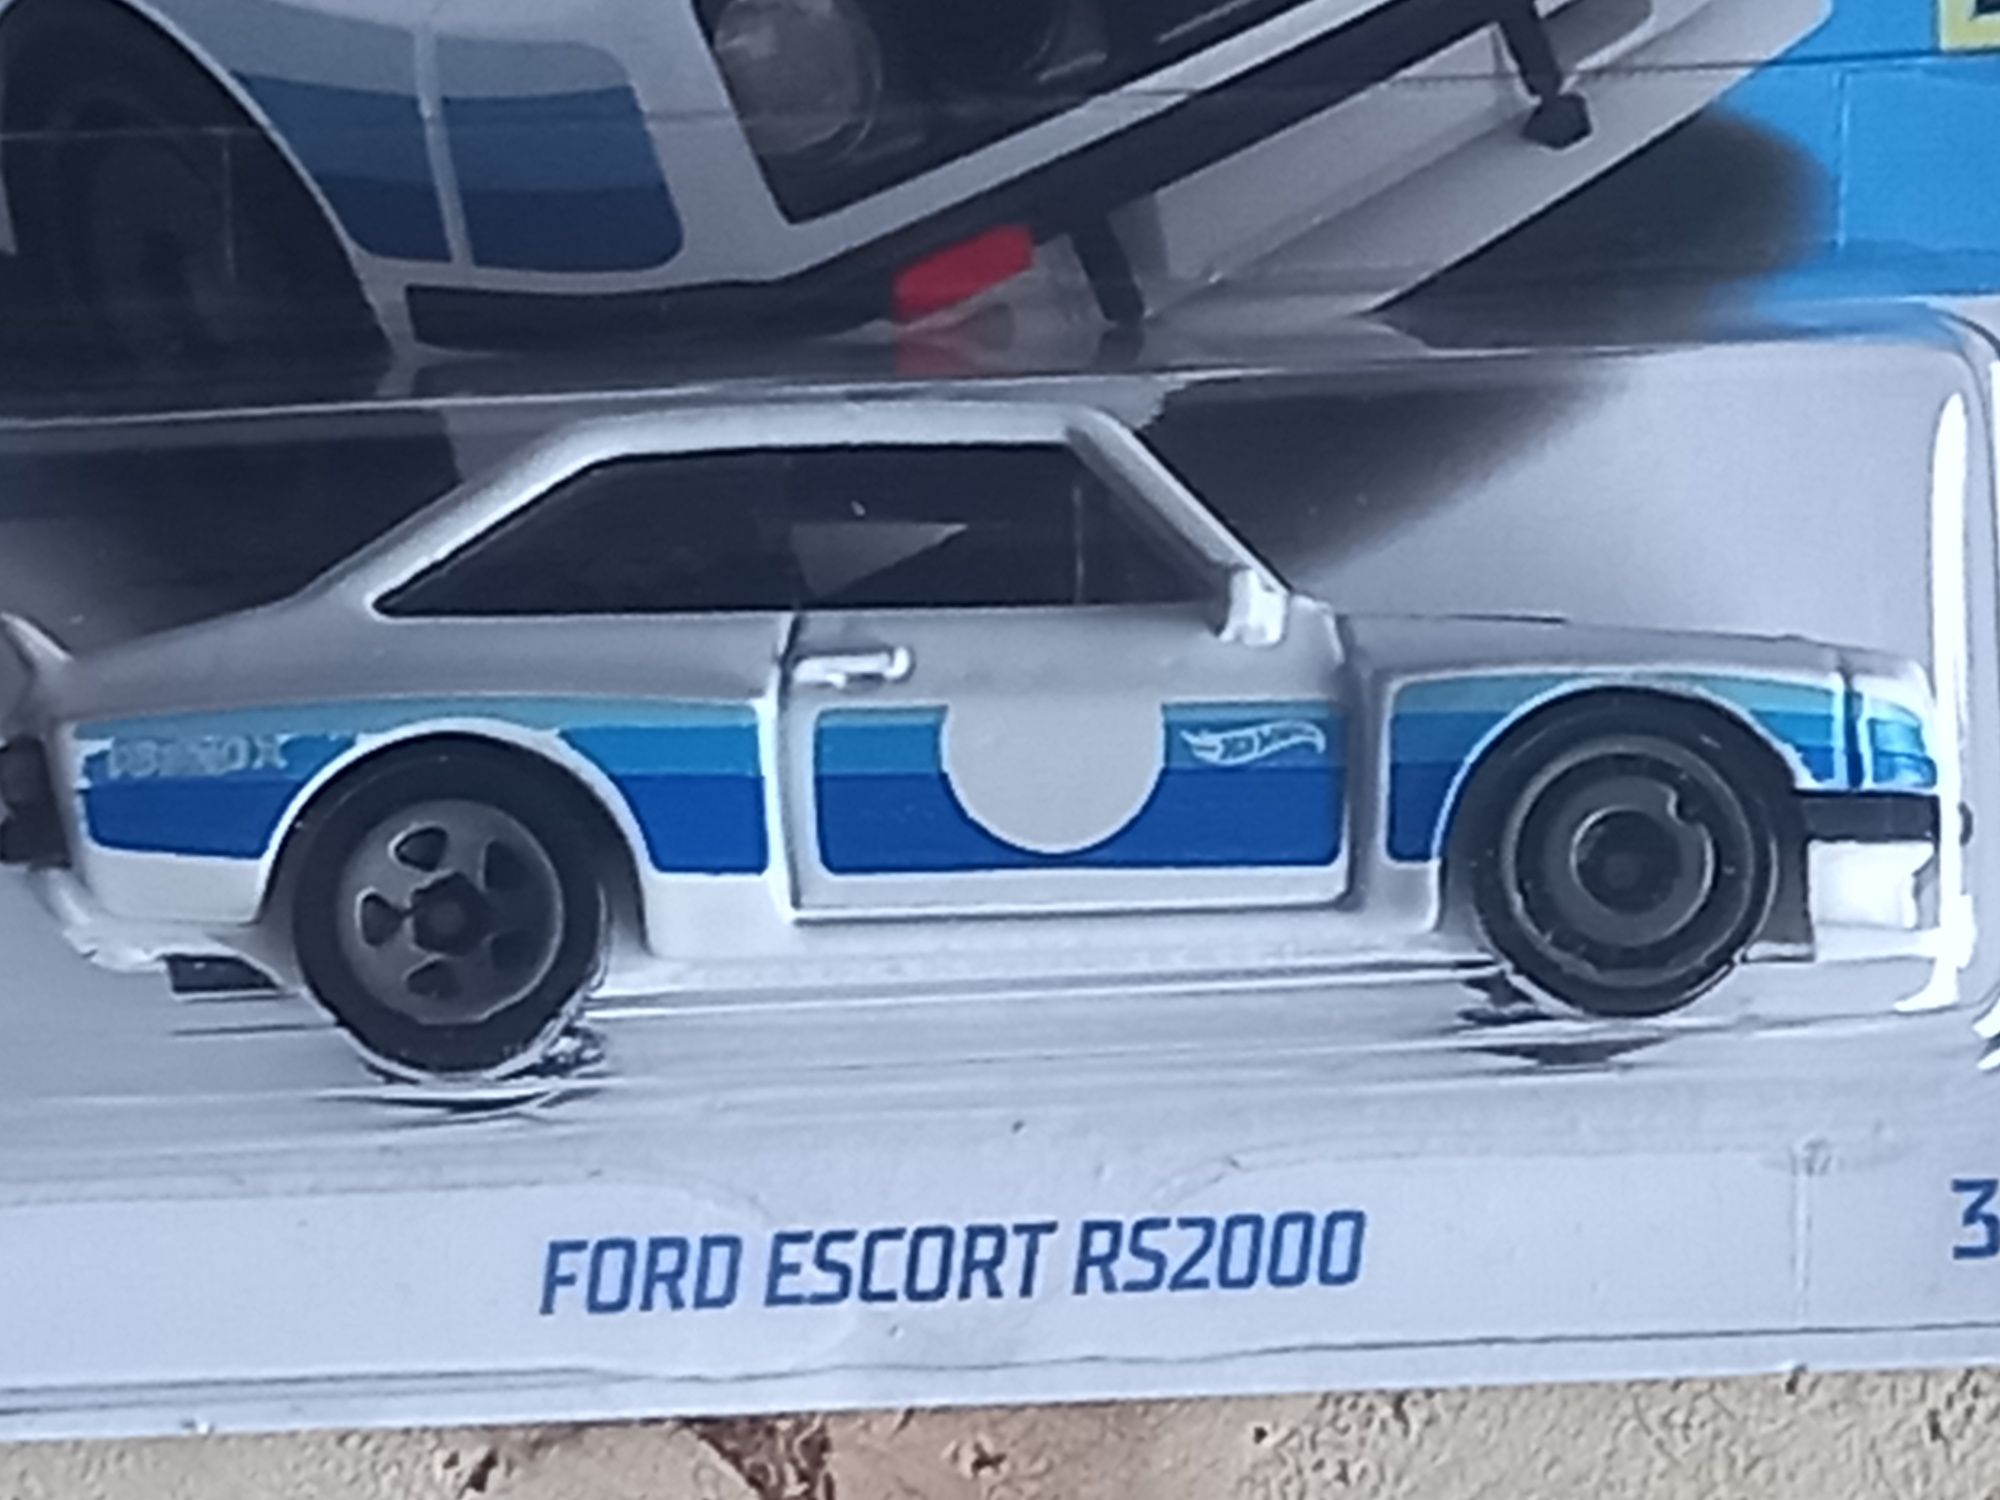 Ford escort rs2000